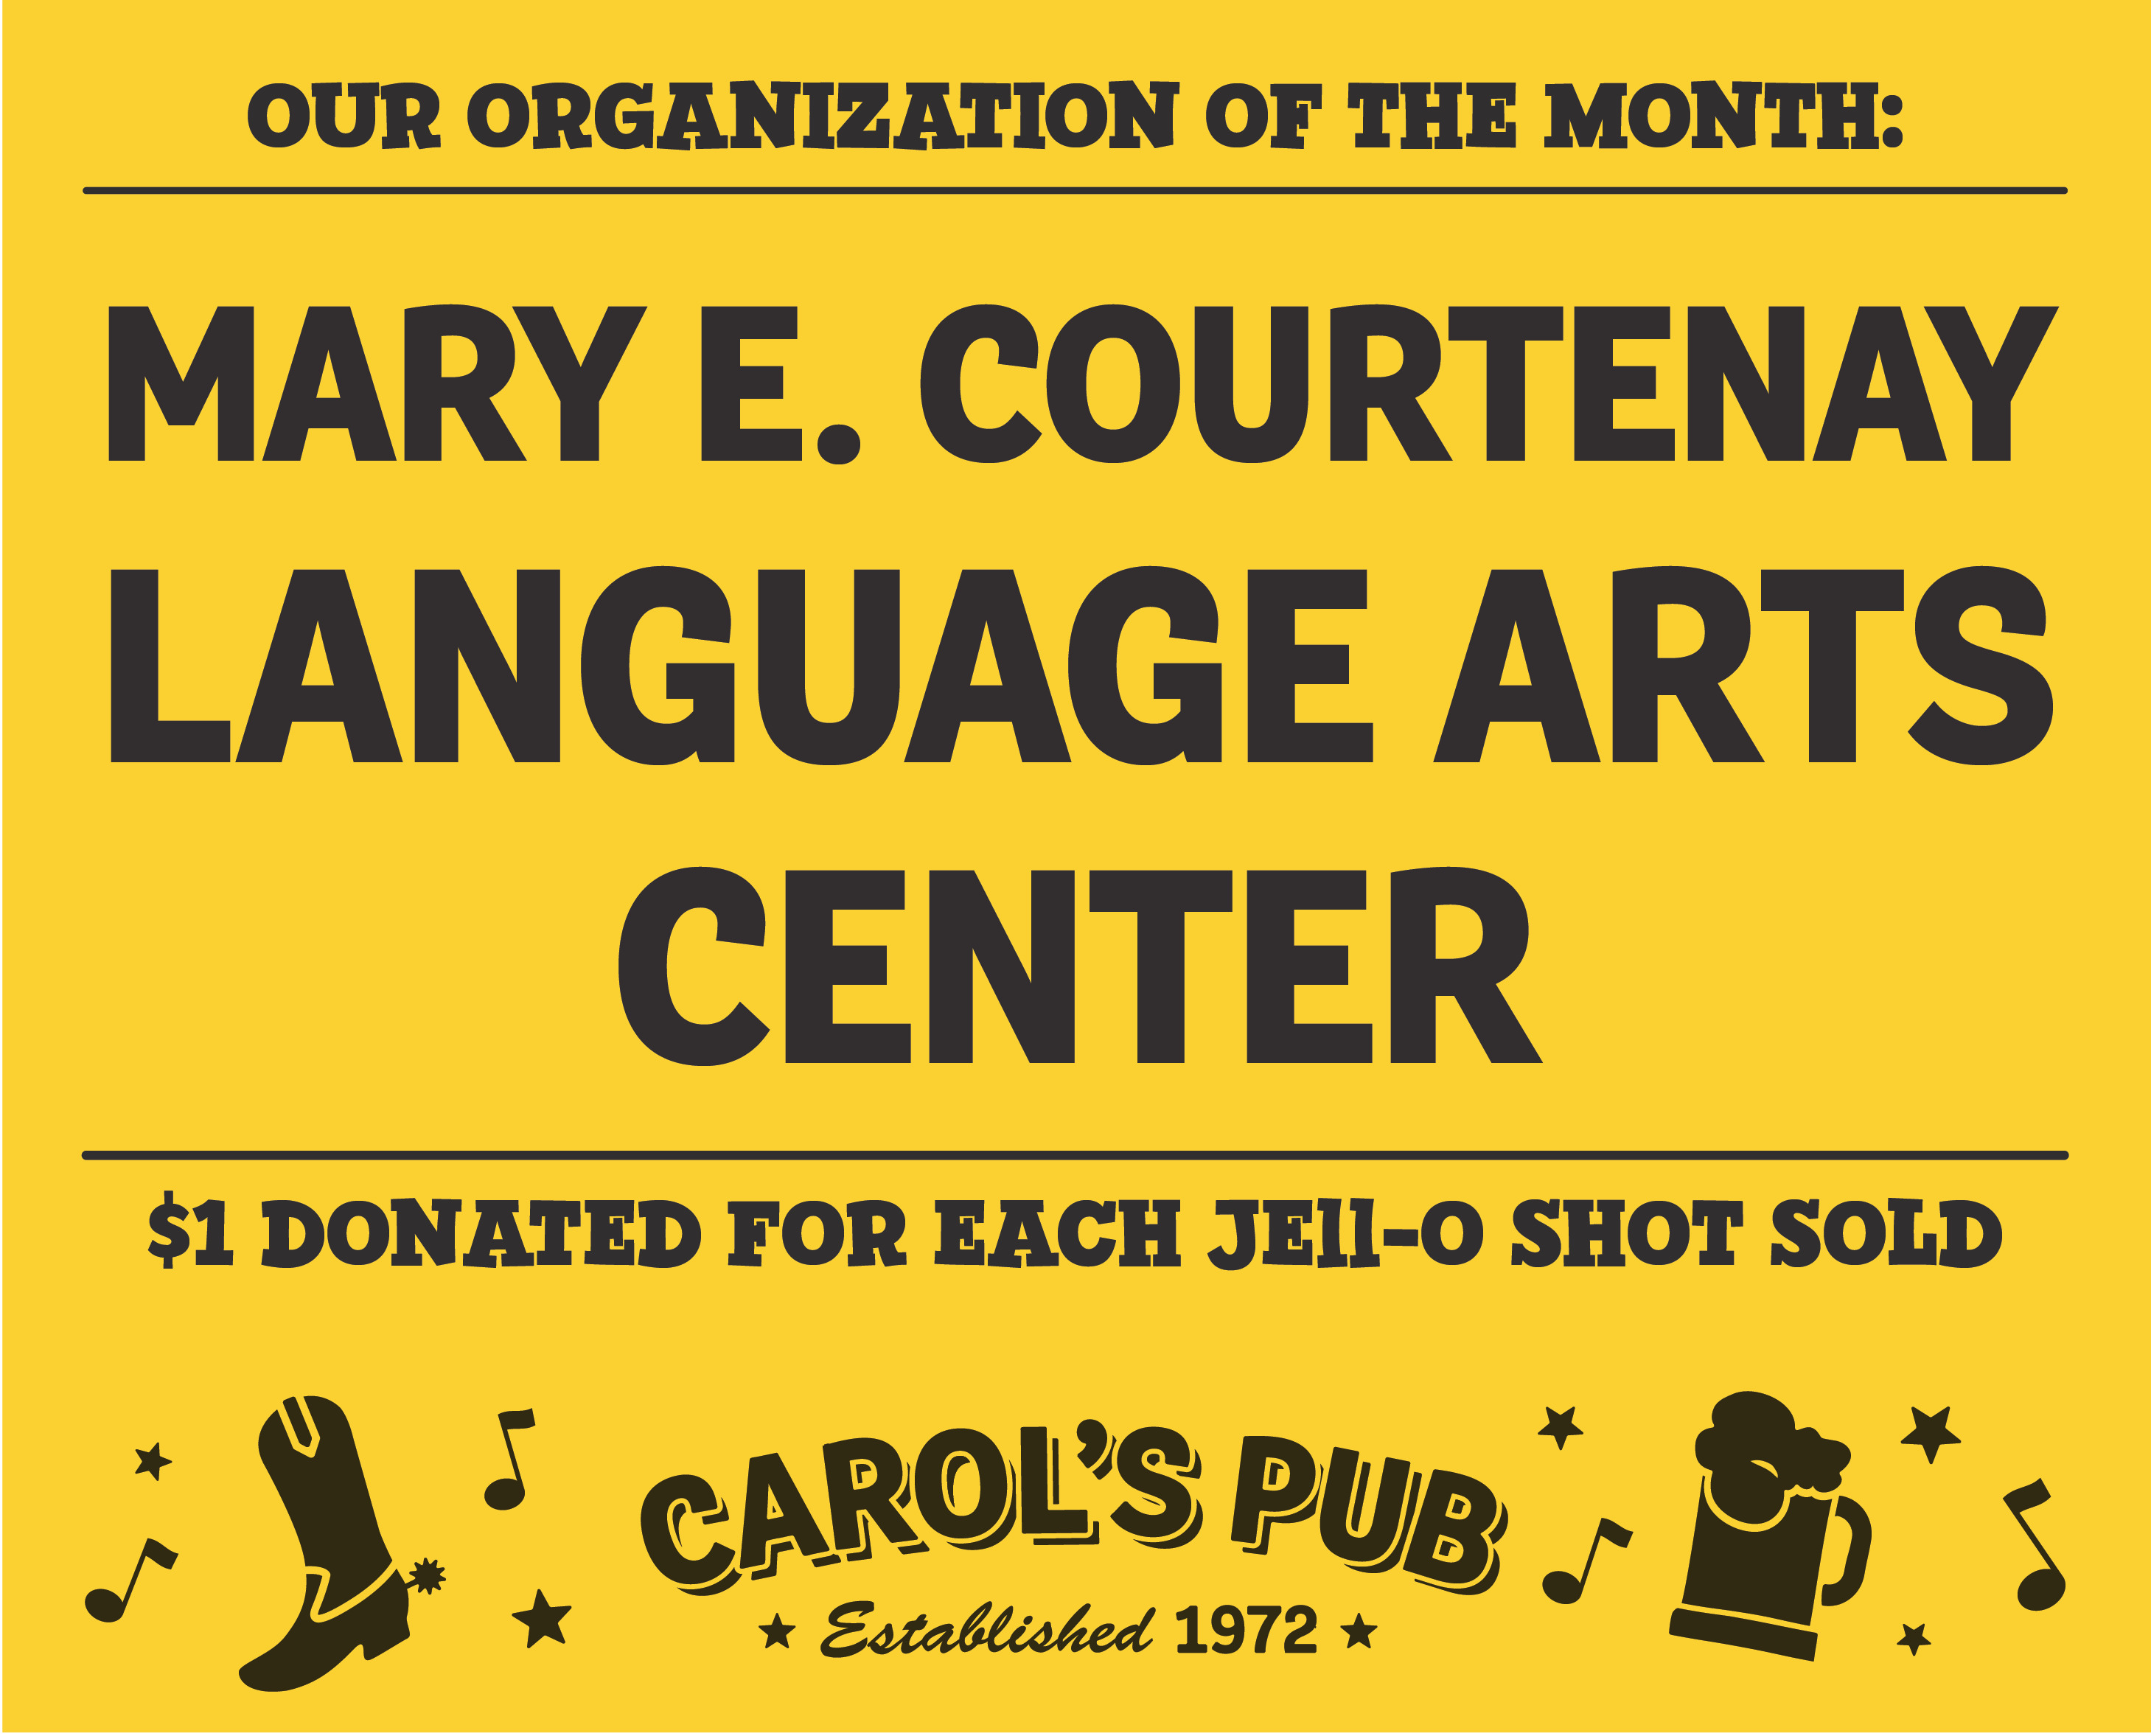 Poster for Mary E. Courtenay Language Arts Center, September's Organization of the Month